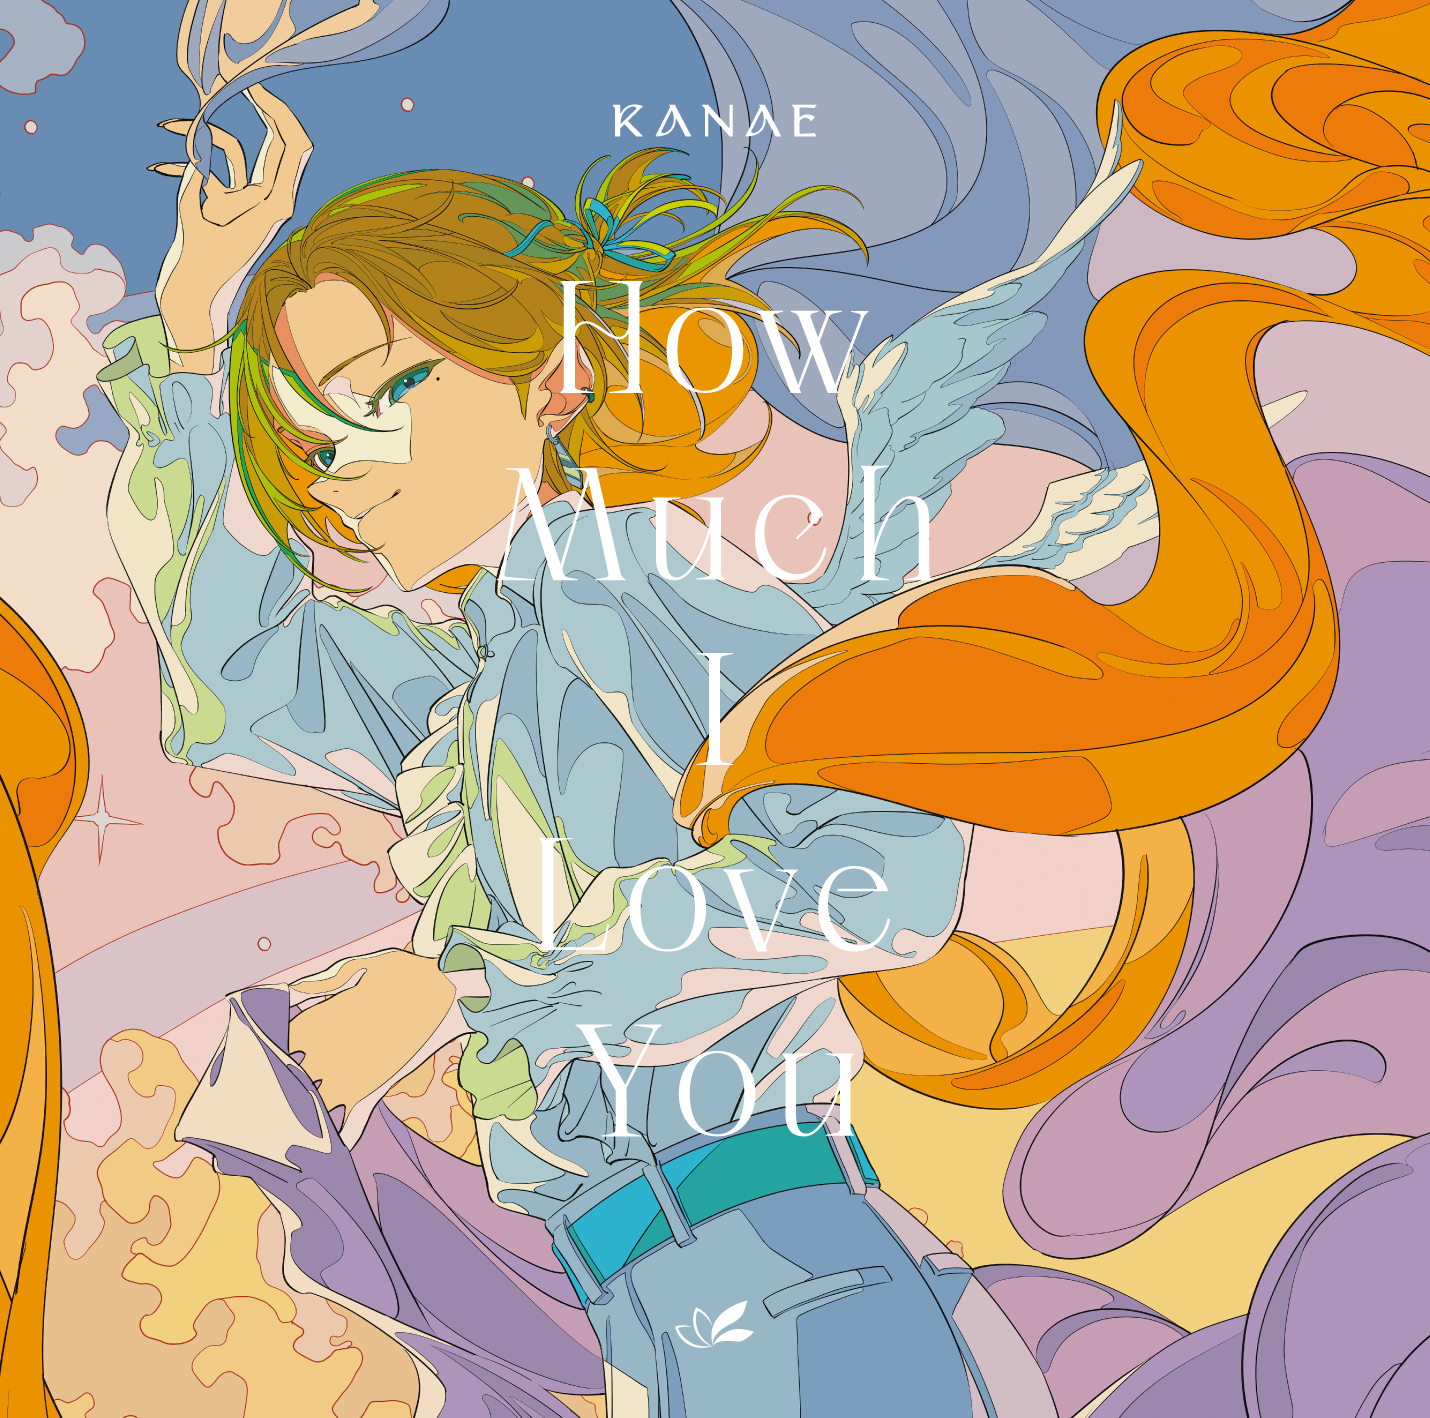 How Much I Love You 【通常盤(CD)】